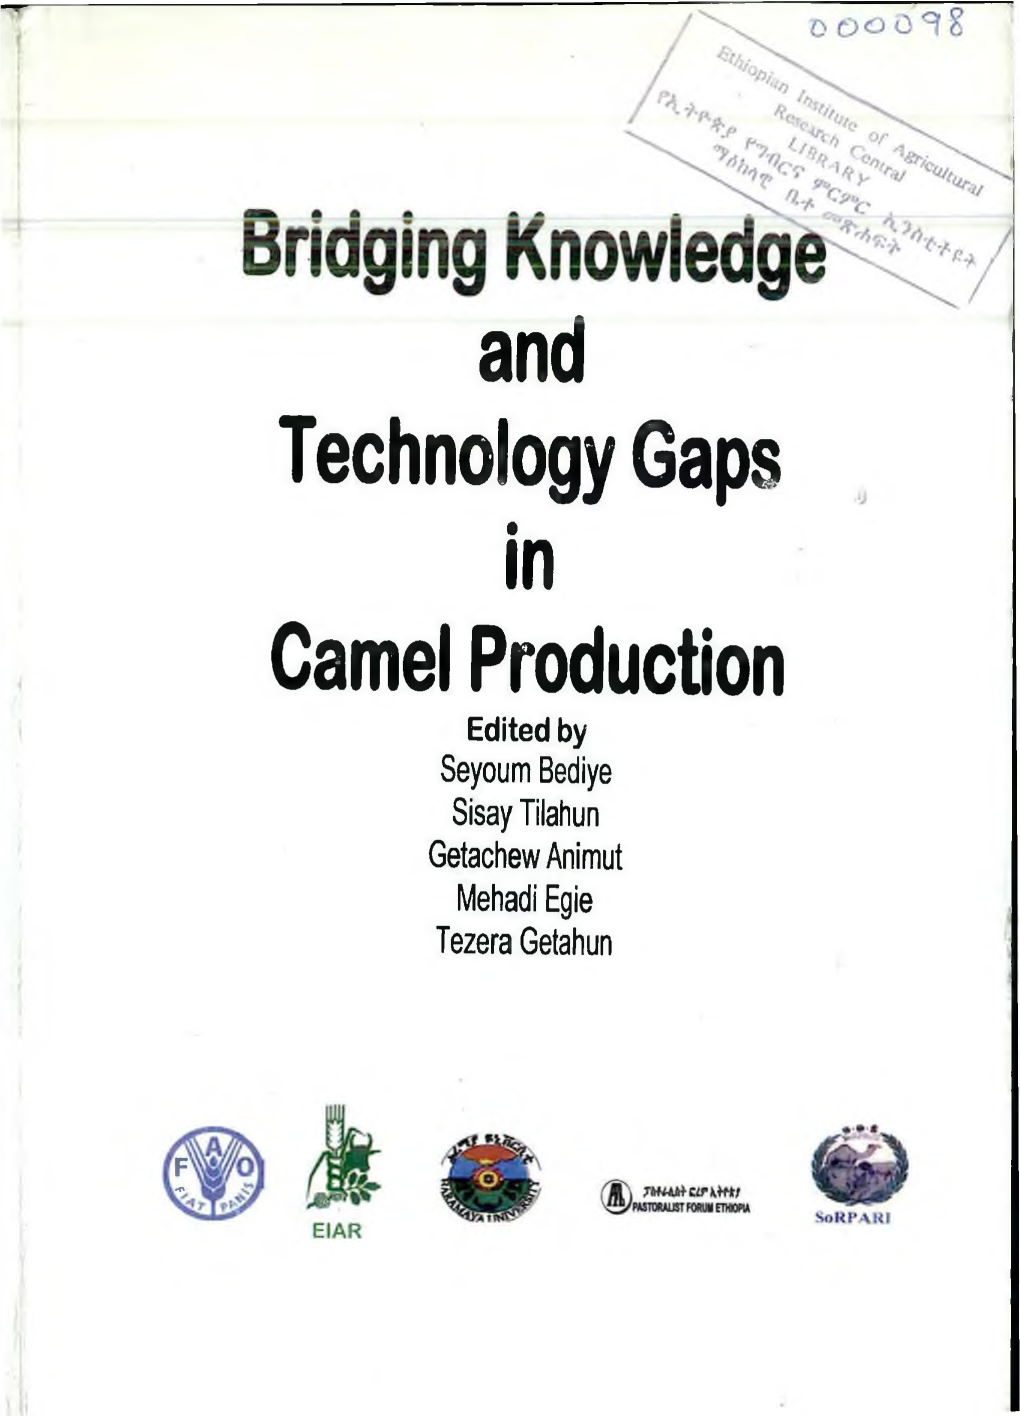 And Technology Gaps in Camel Production